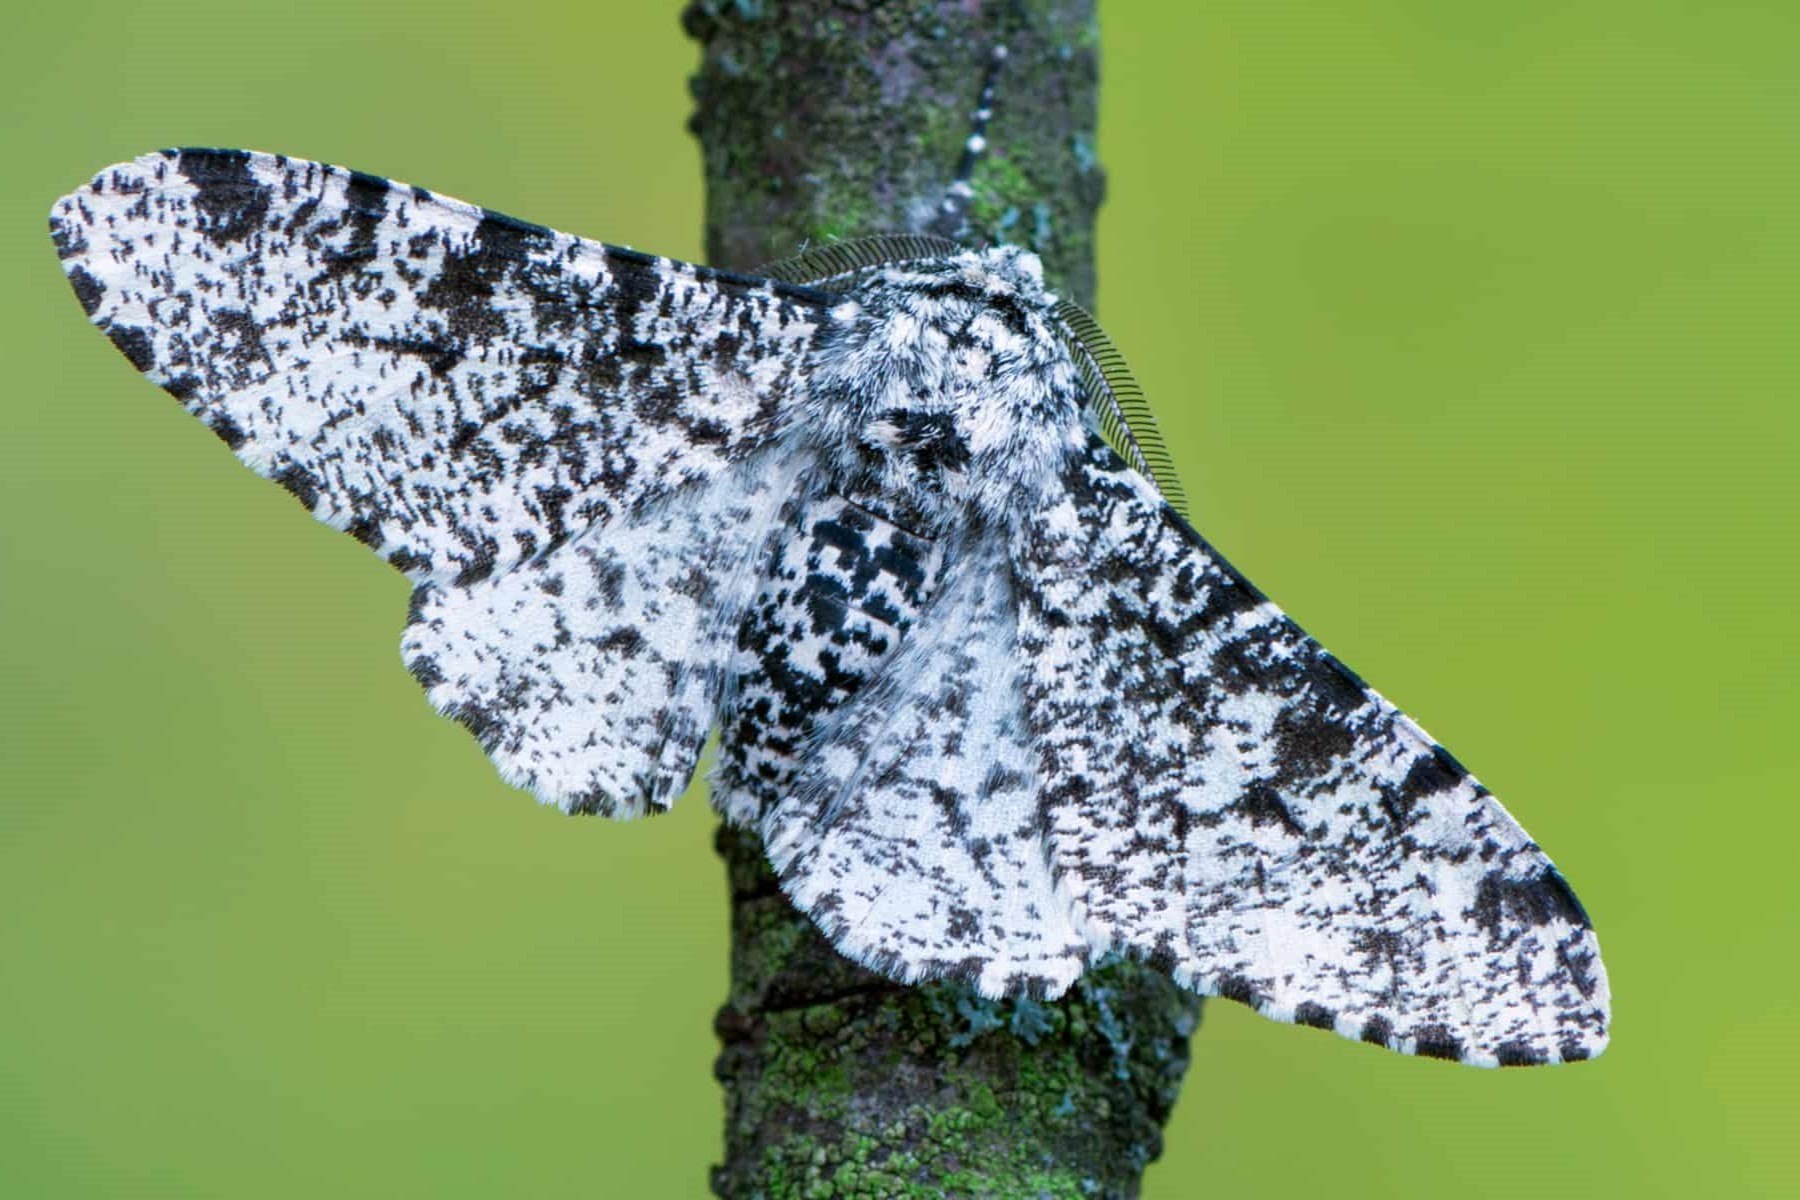 The Astonishing Natural Selection Of The Peppered Moth